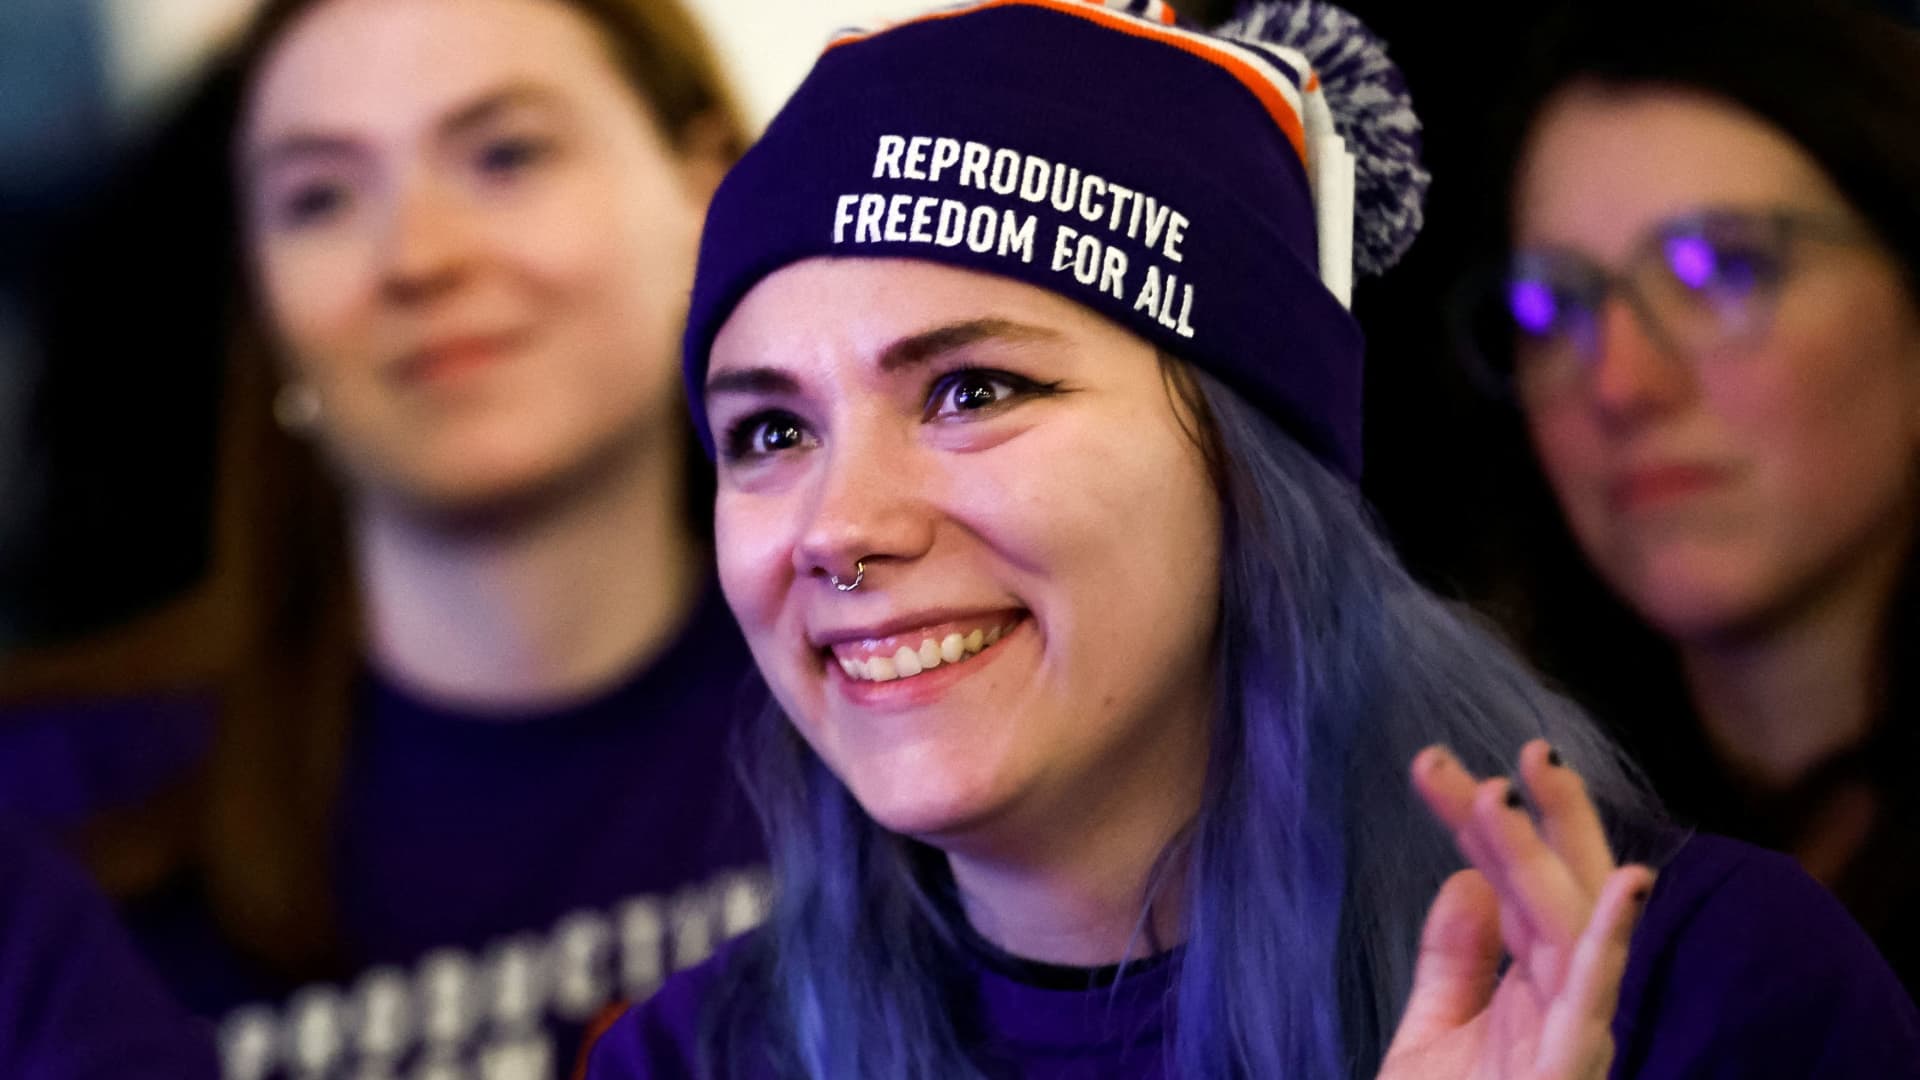 Women cheer as they hear early voting results indicating the passage of Proposal 3, a midterm ballot measure that enshrines abortion rights, during a Reproductive Freedom For All watch party on U.S. midterm election night in Detroit, Michigan, November 8, 2022. 